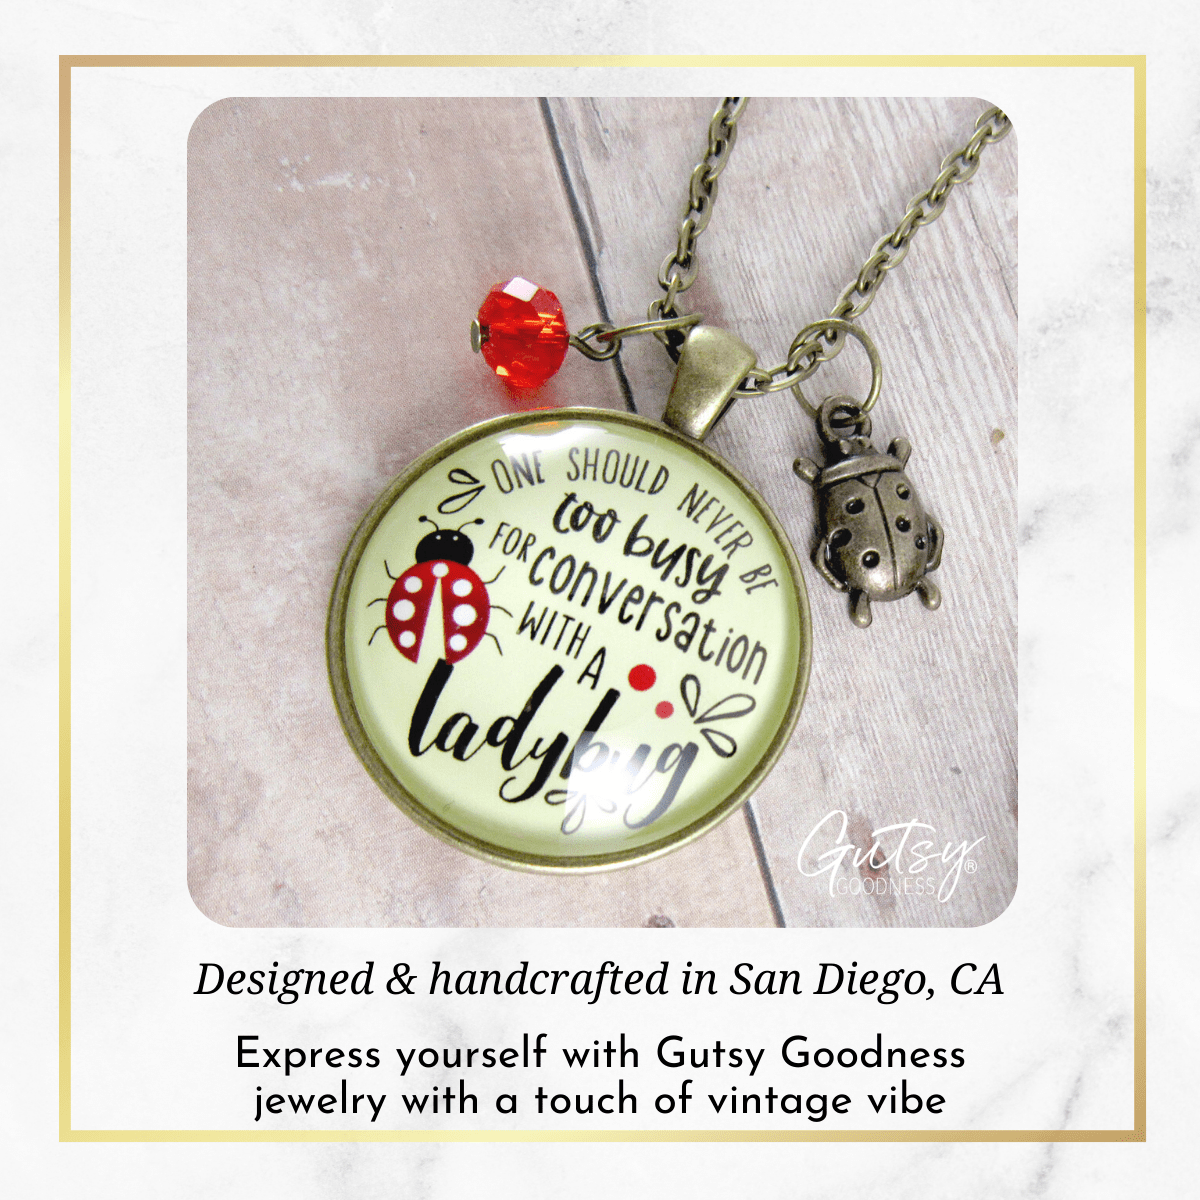 Ladybug Necklace Never Too Busy Friendship Quote Gardener Jewelry - Gutsy Goodness